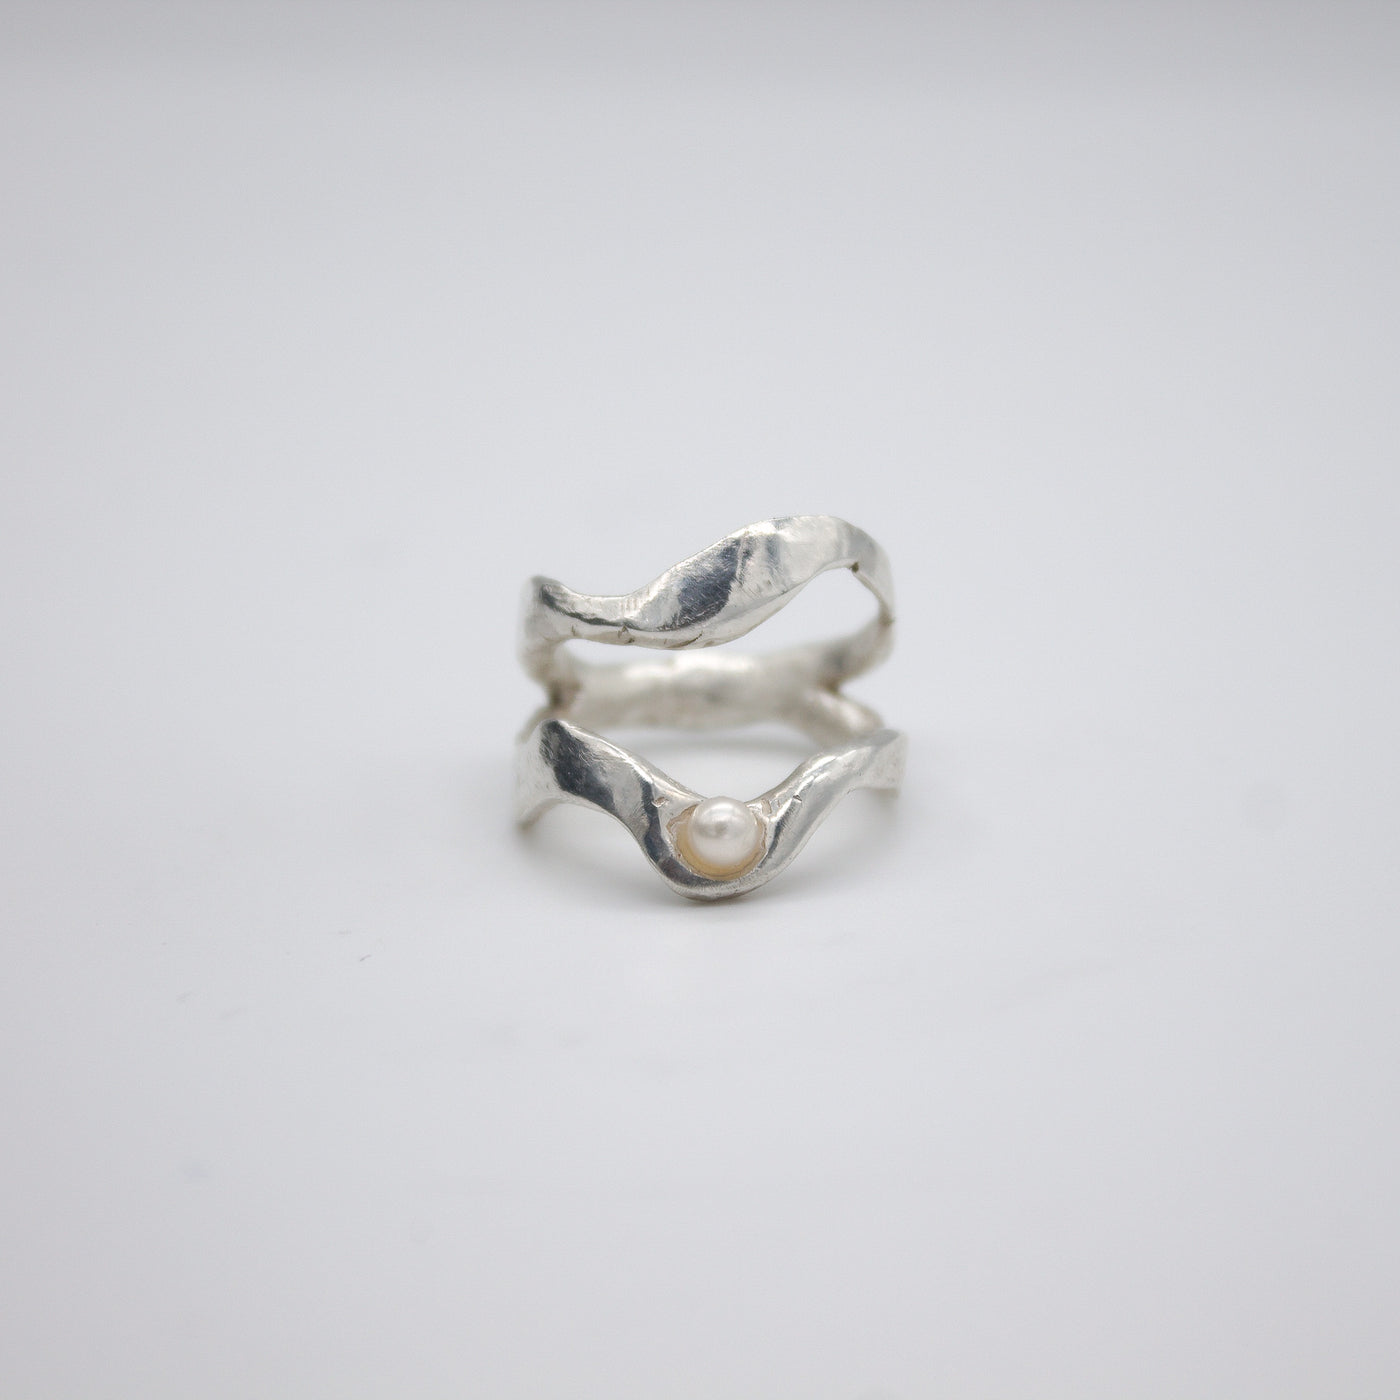 FRYA // Fine silver ring with a small freshwater pearl